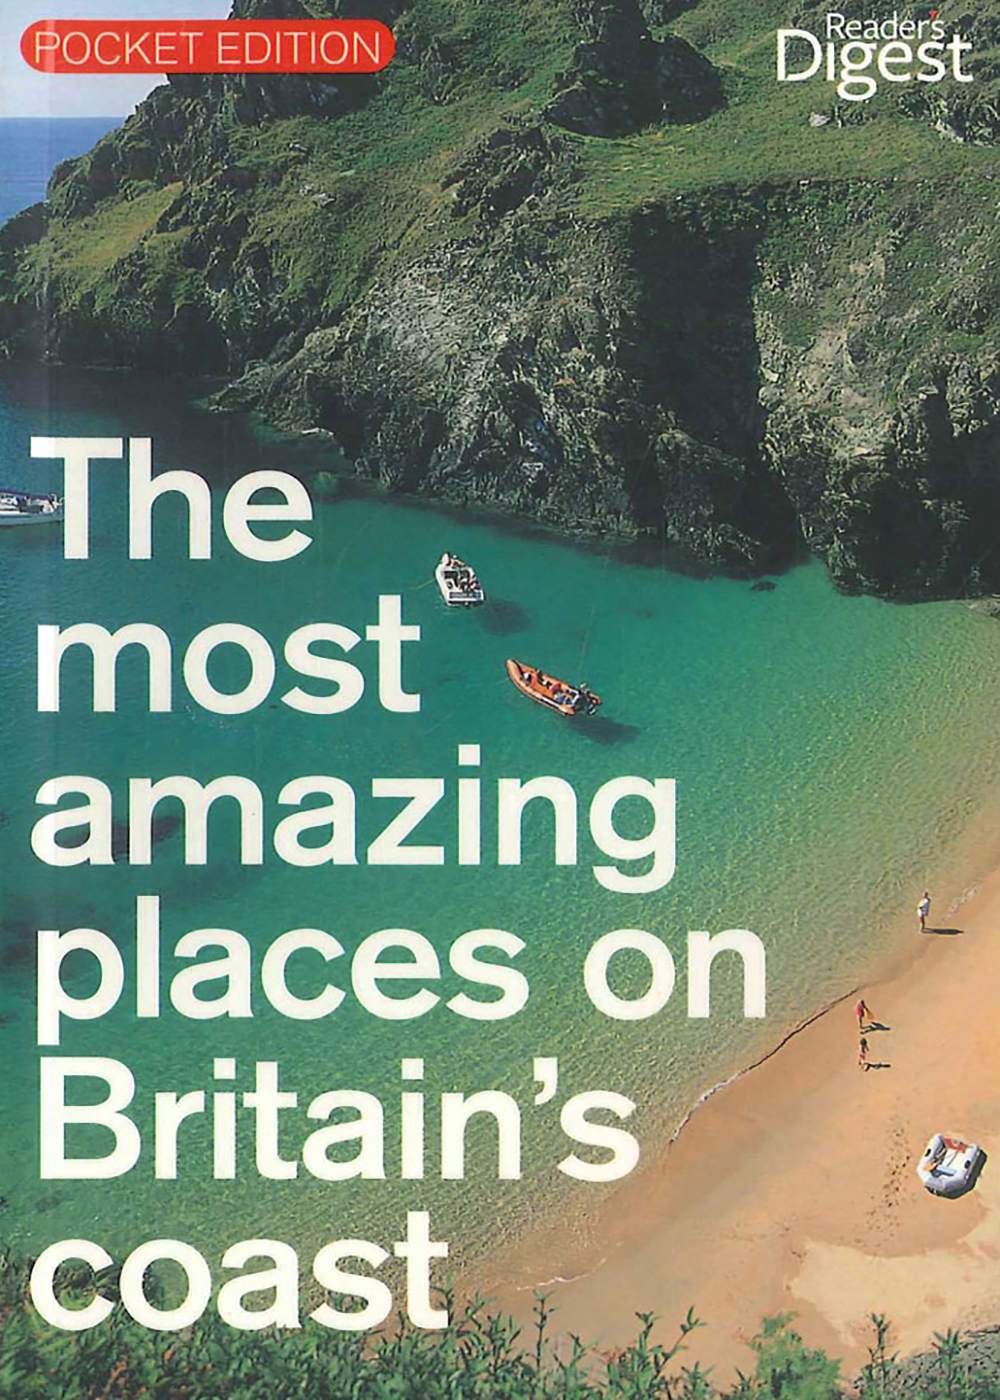 Reader's Digest - The Most Amazing Places on Britain's Coast